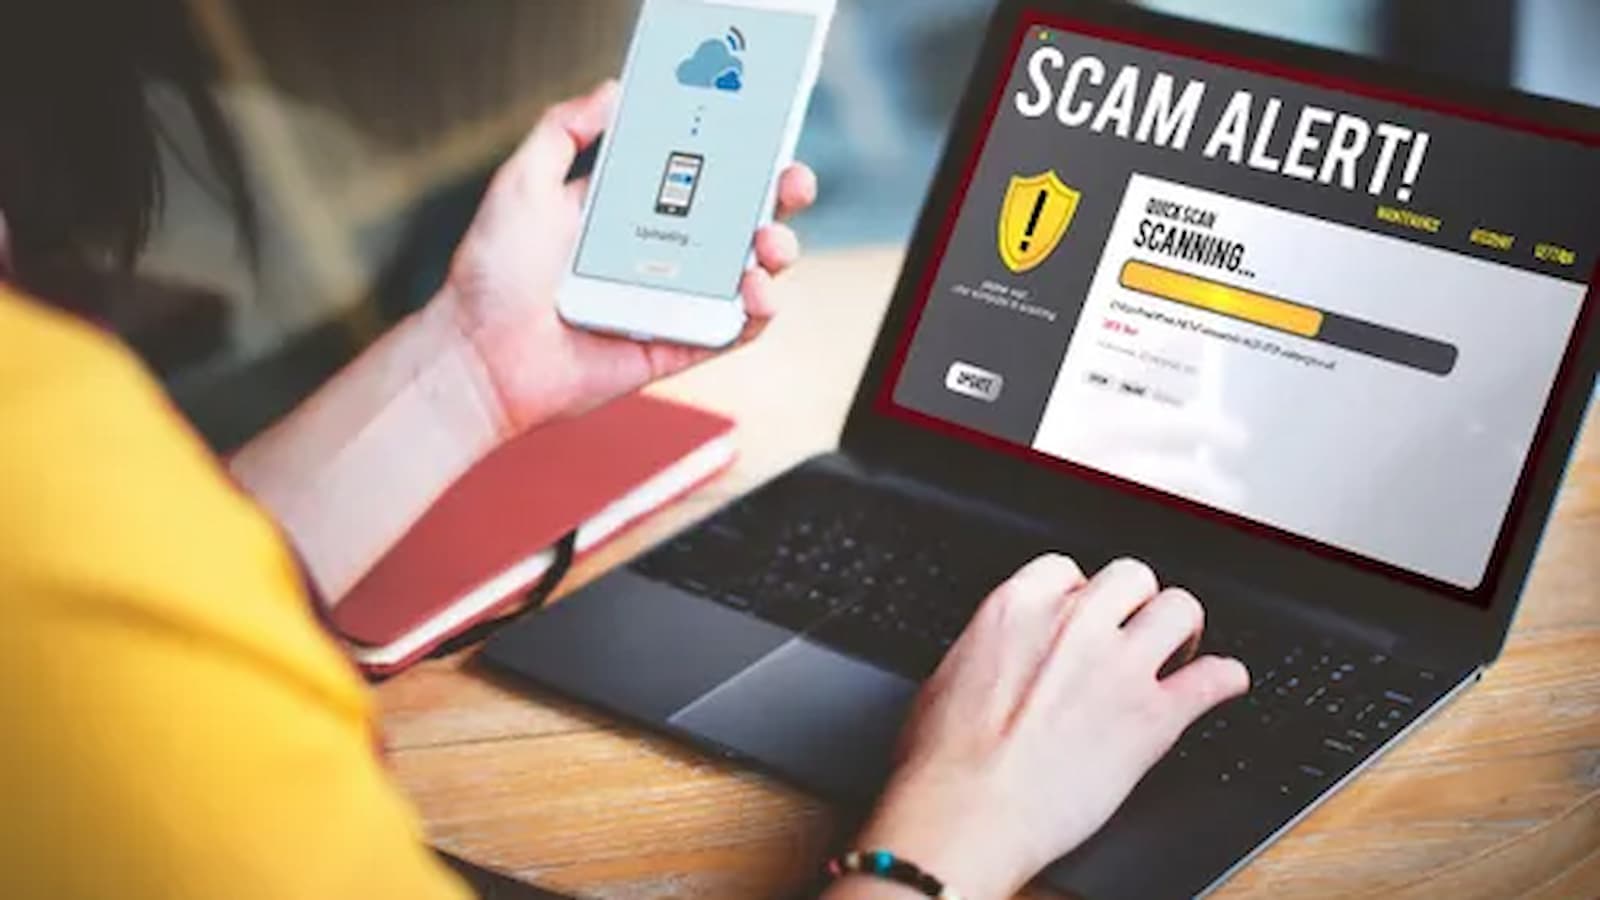 Stay away from these 14 Scam and fraud activities throughout the holiday season.